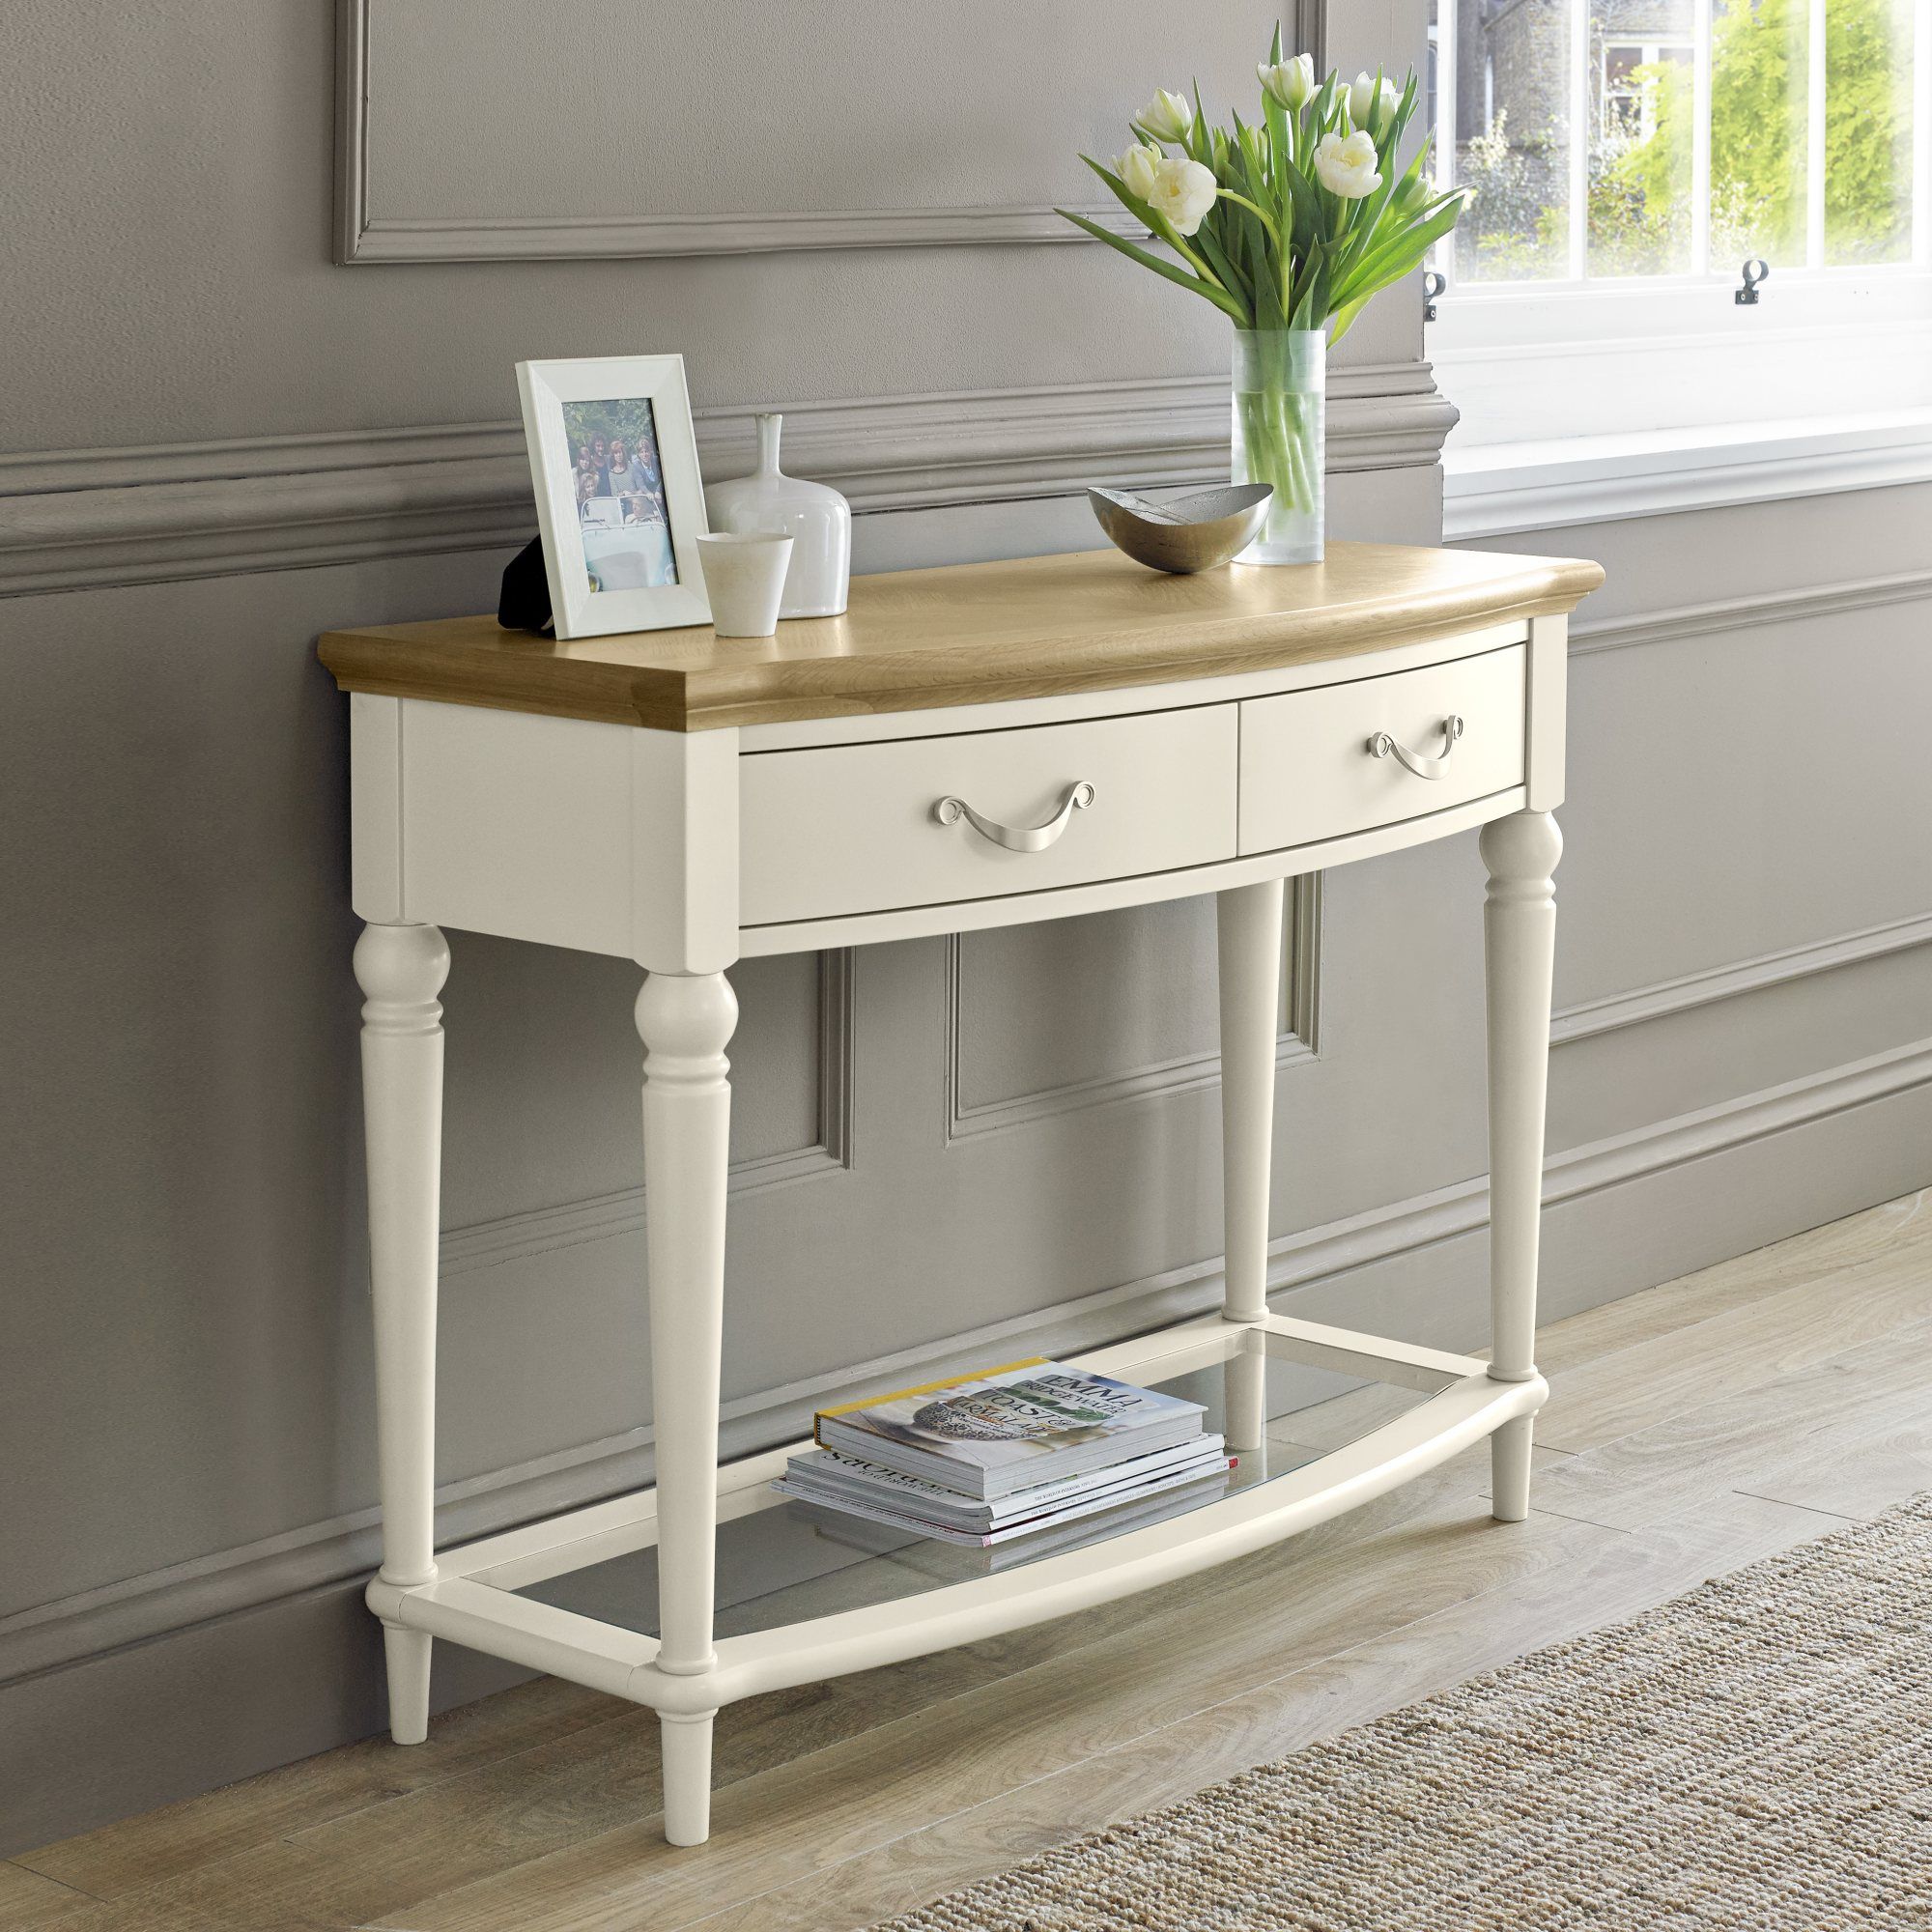 Premier Collection Montreux Pale Oak & Antique White Console Table With Inside White Triangular Console Tables (View 2 of 20)